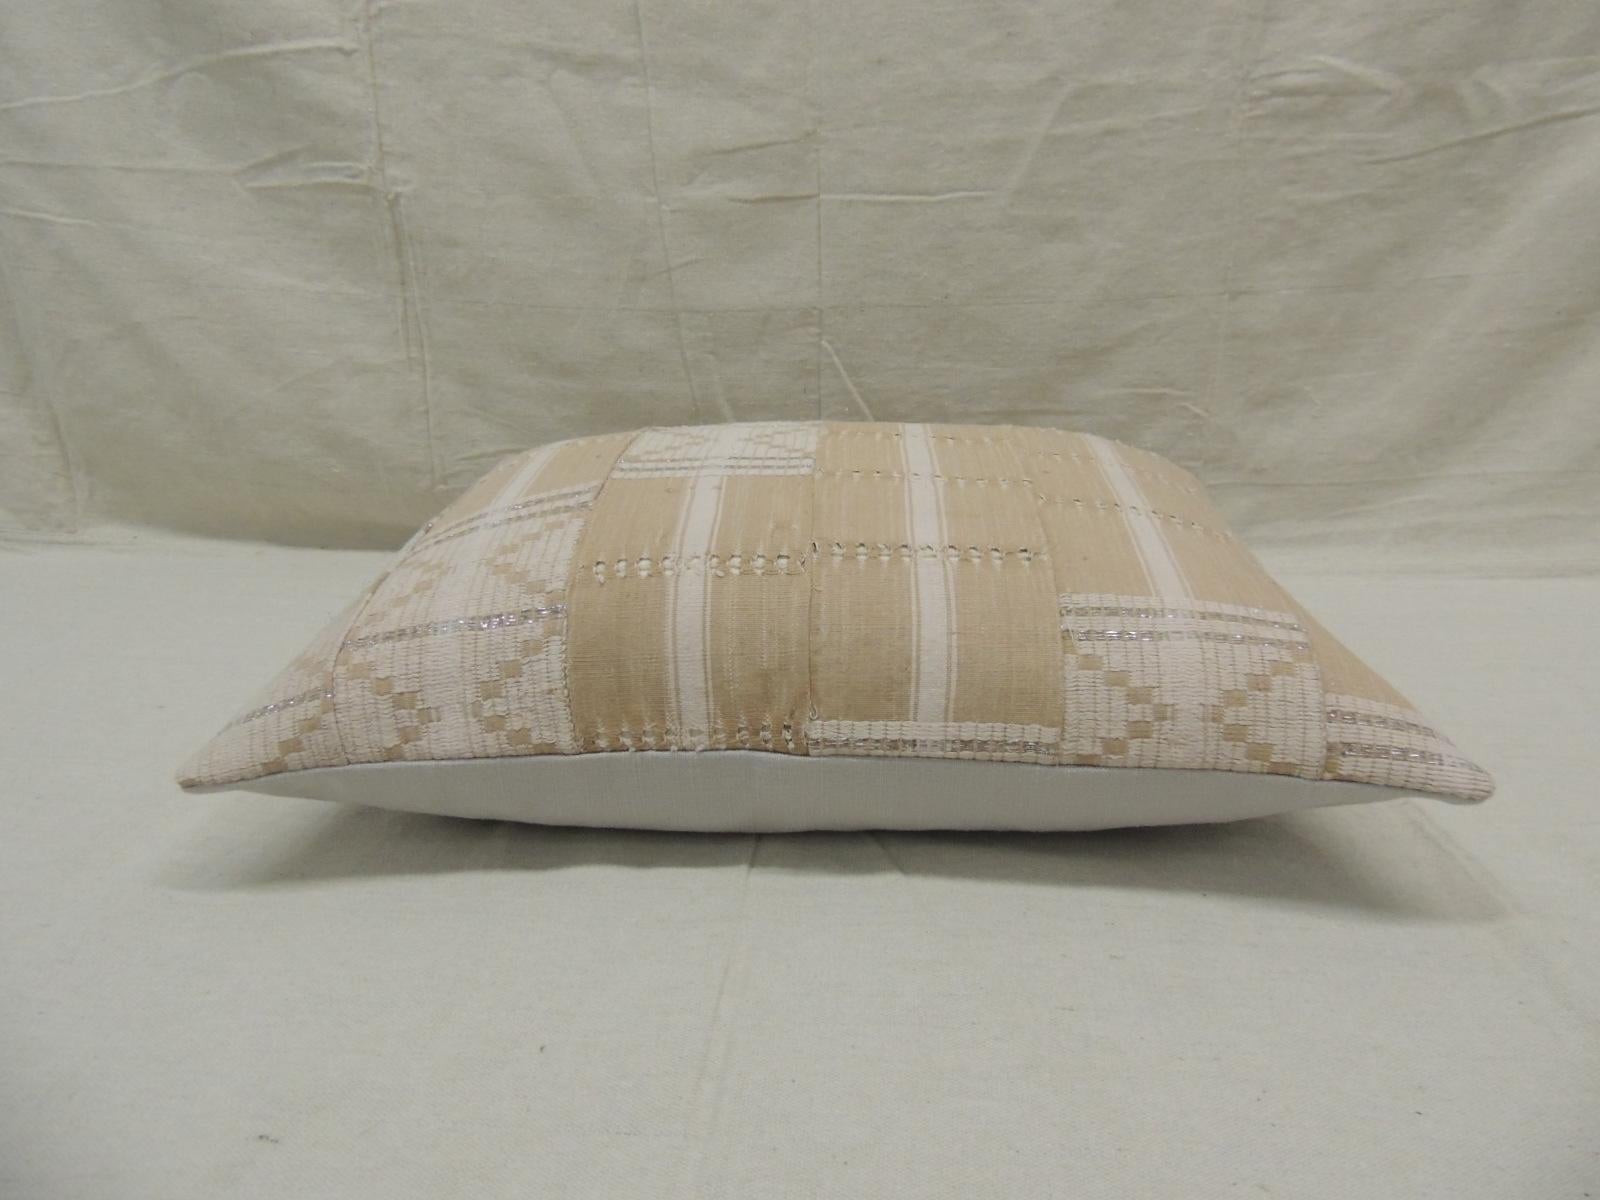 Cotton Vintage Tan and White Woven Ewe Stripweaves African Bolster Decorative Pillow